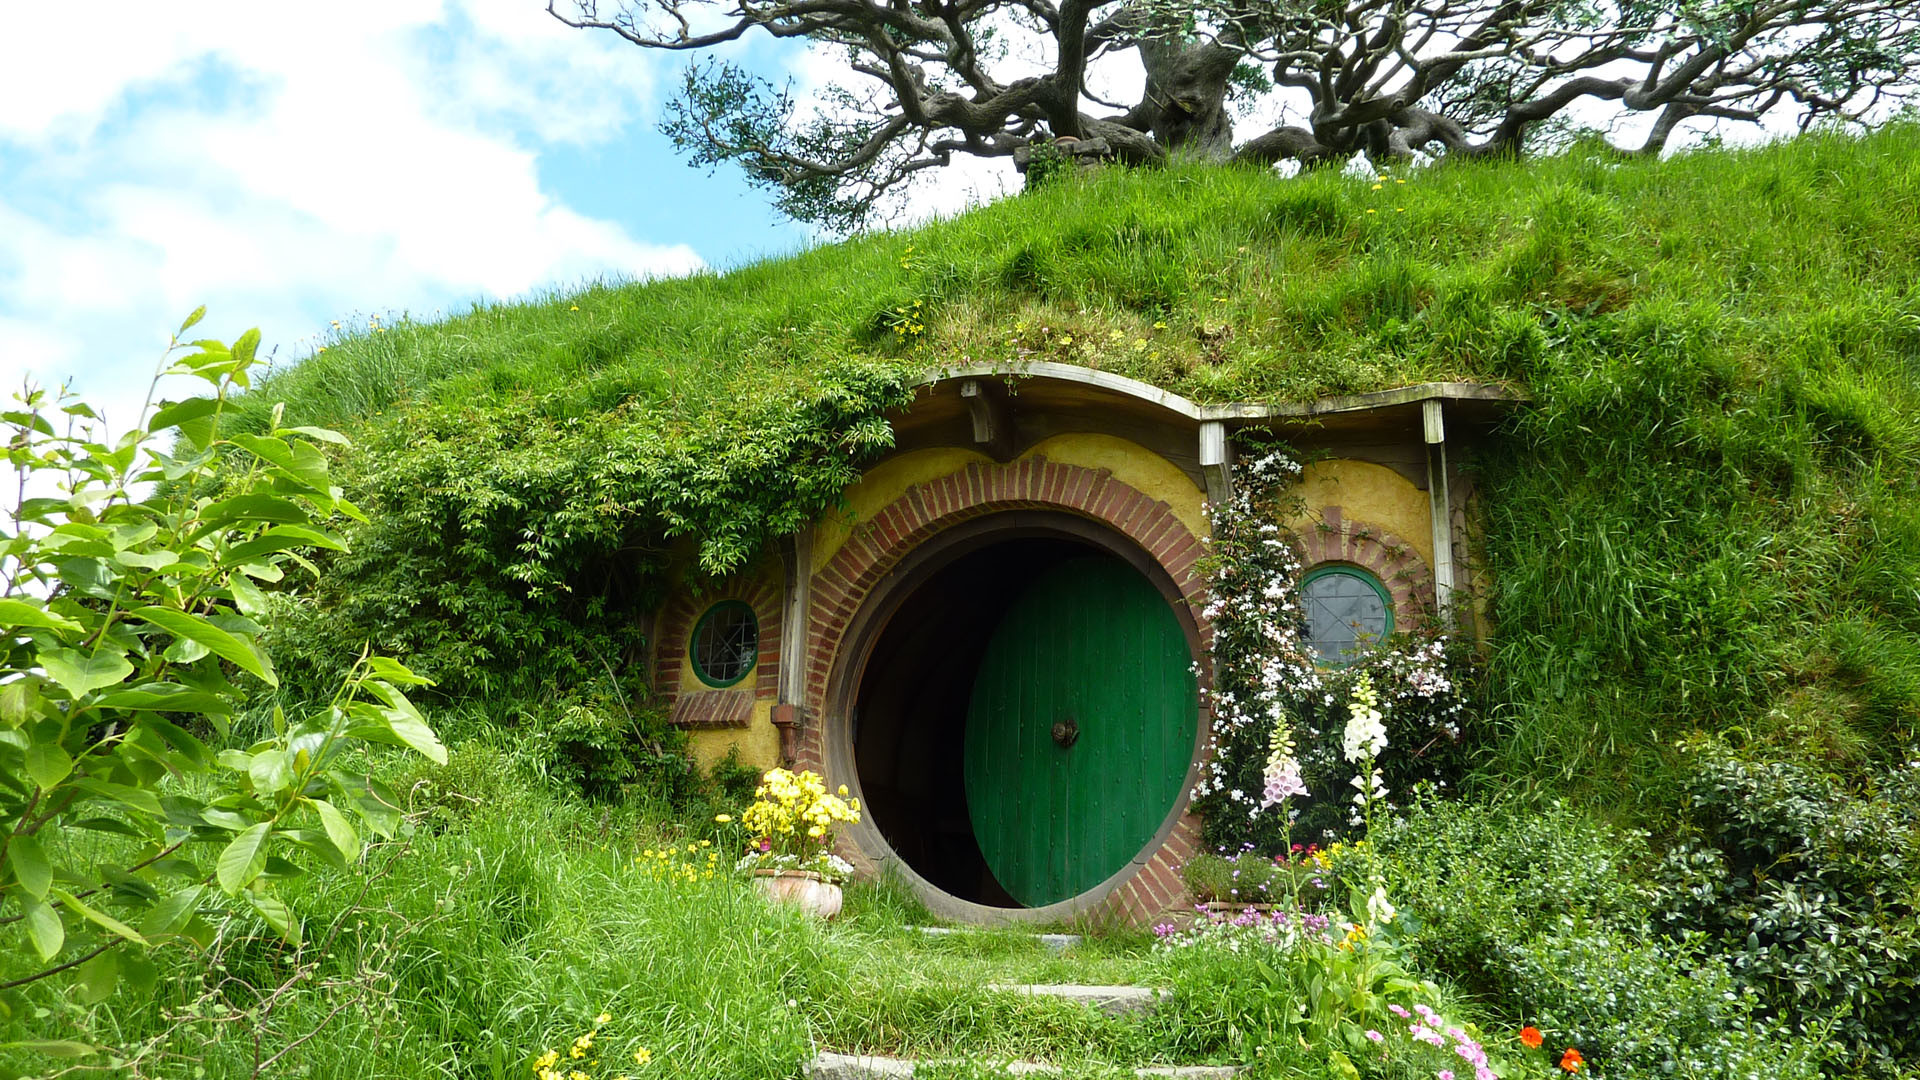 1920x1080 20 Things You Didn't Know About New Zealand Hobbit house